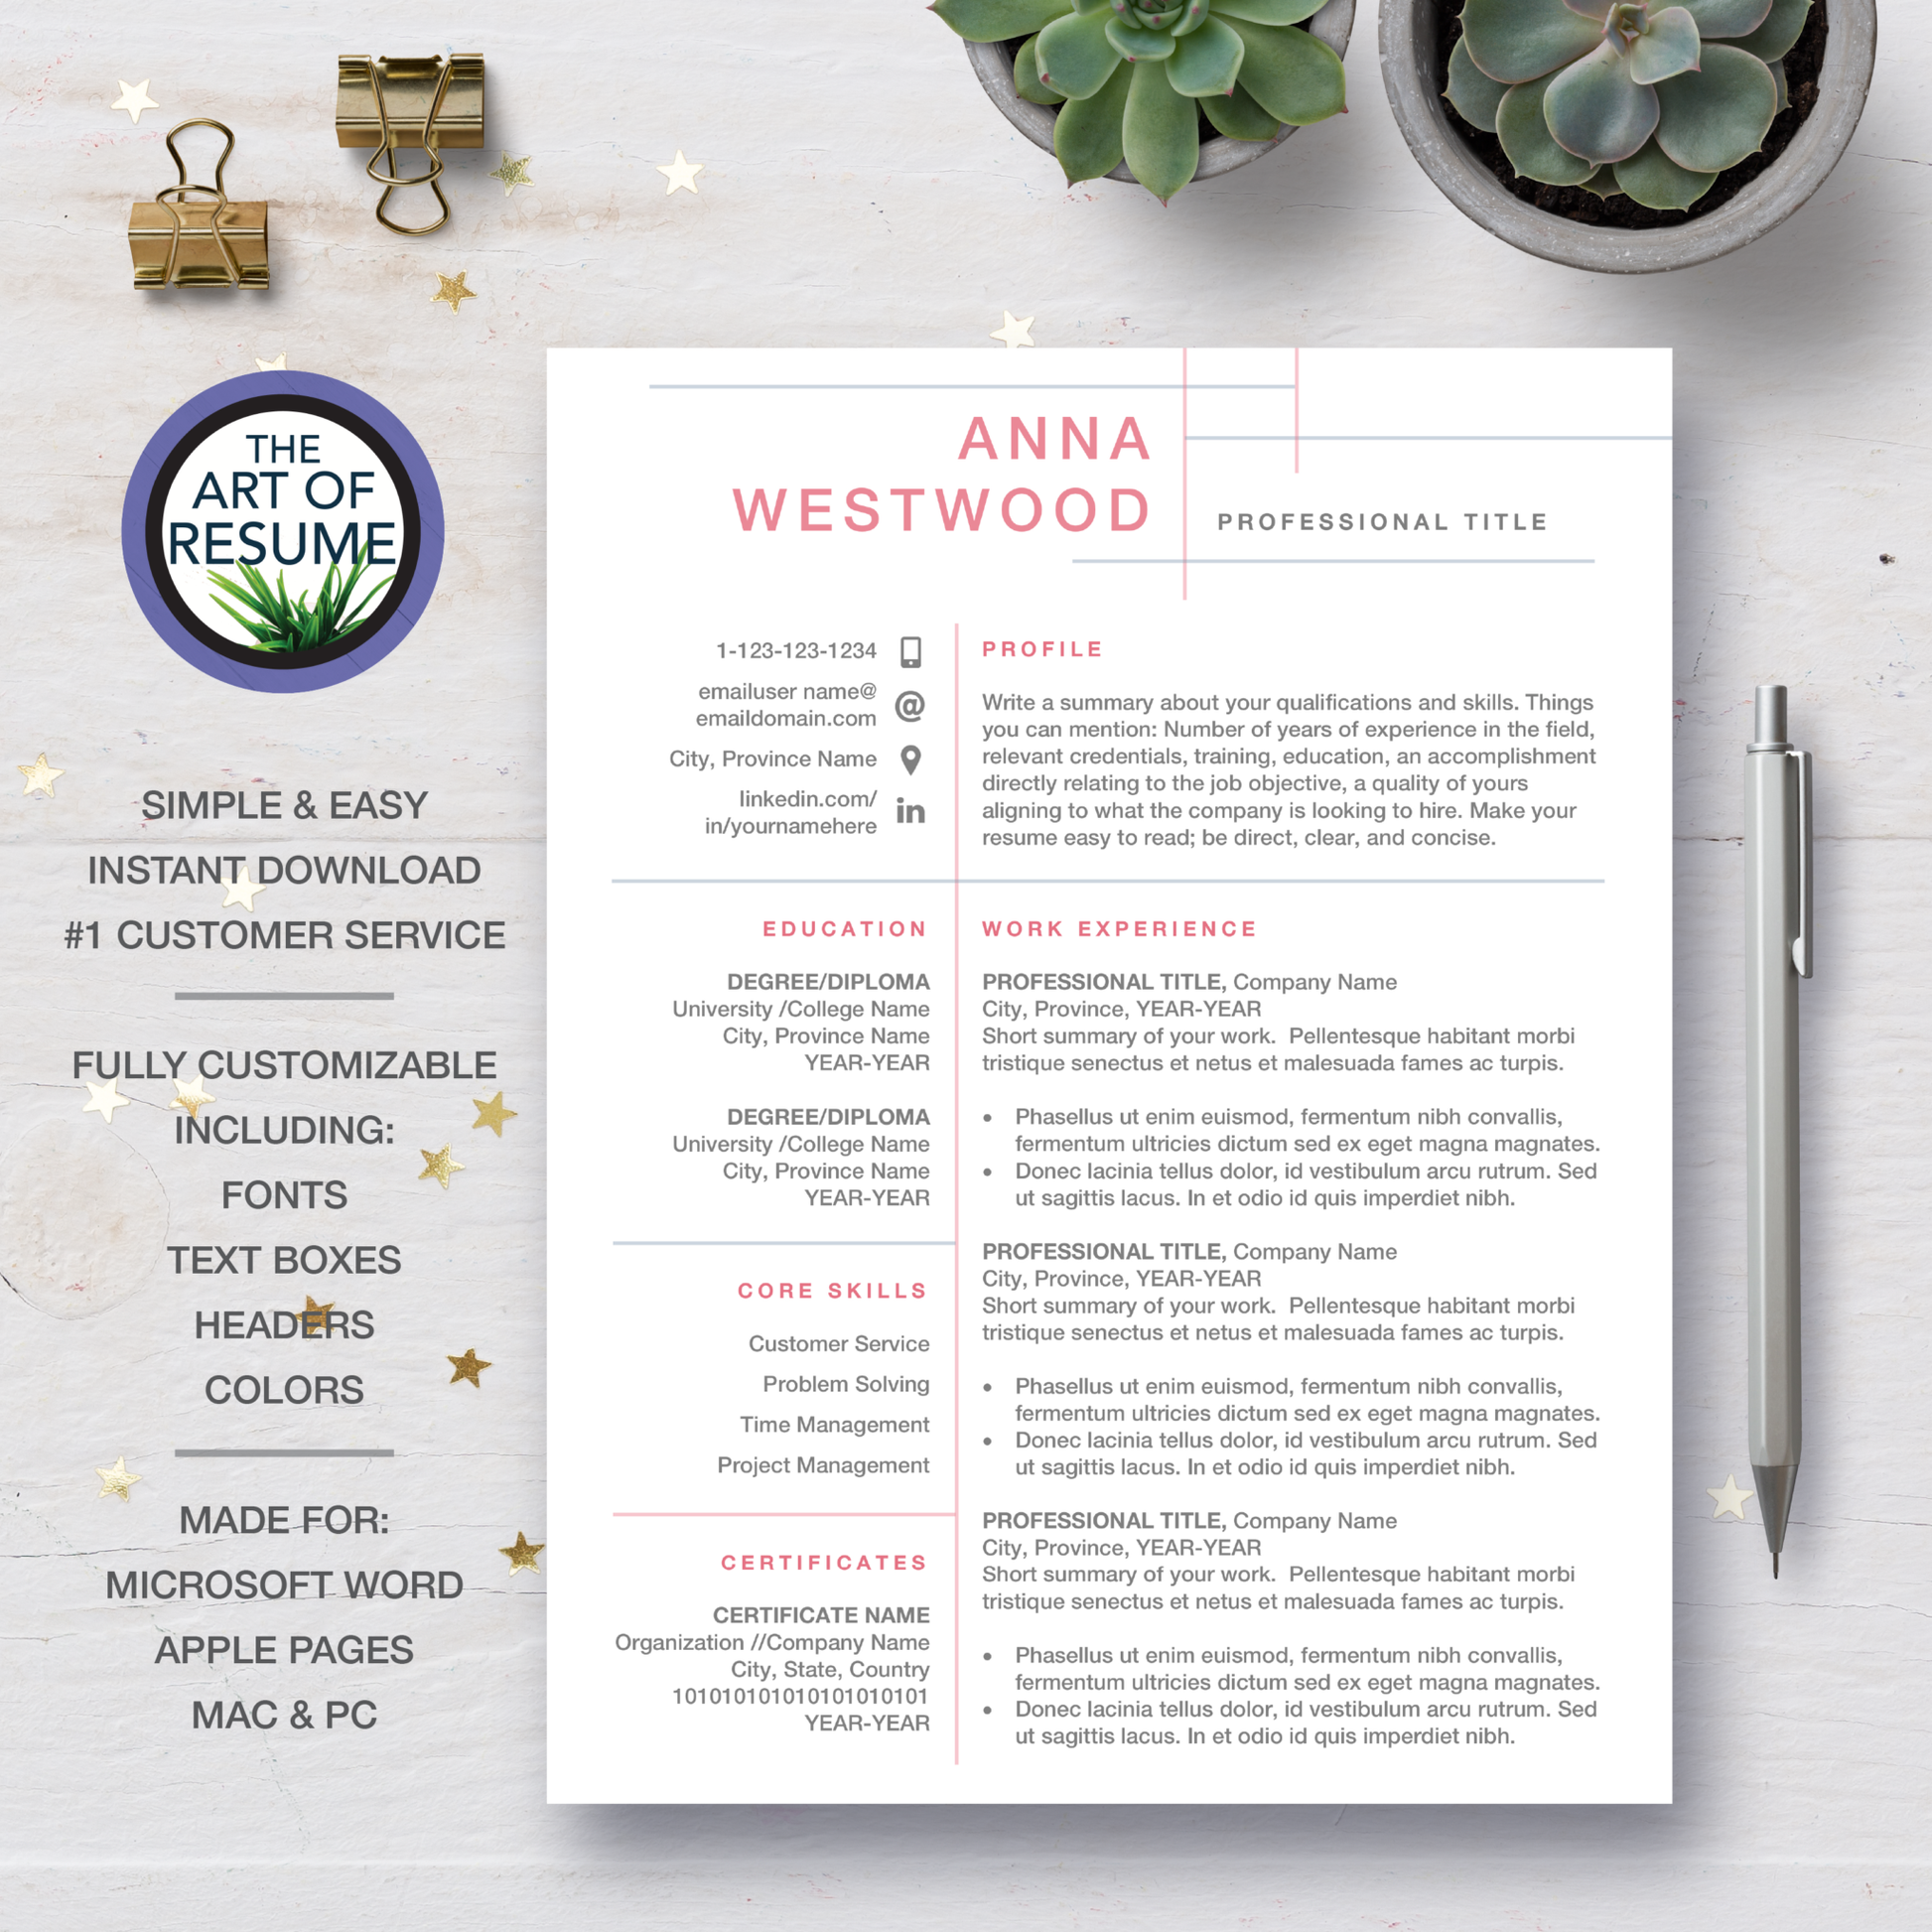 Resume Template Design for Microsoft Word and Apple Pages- Resume and Free Cover Letter